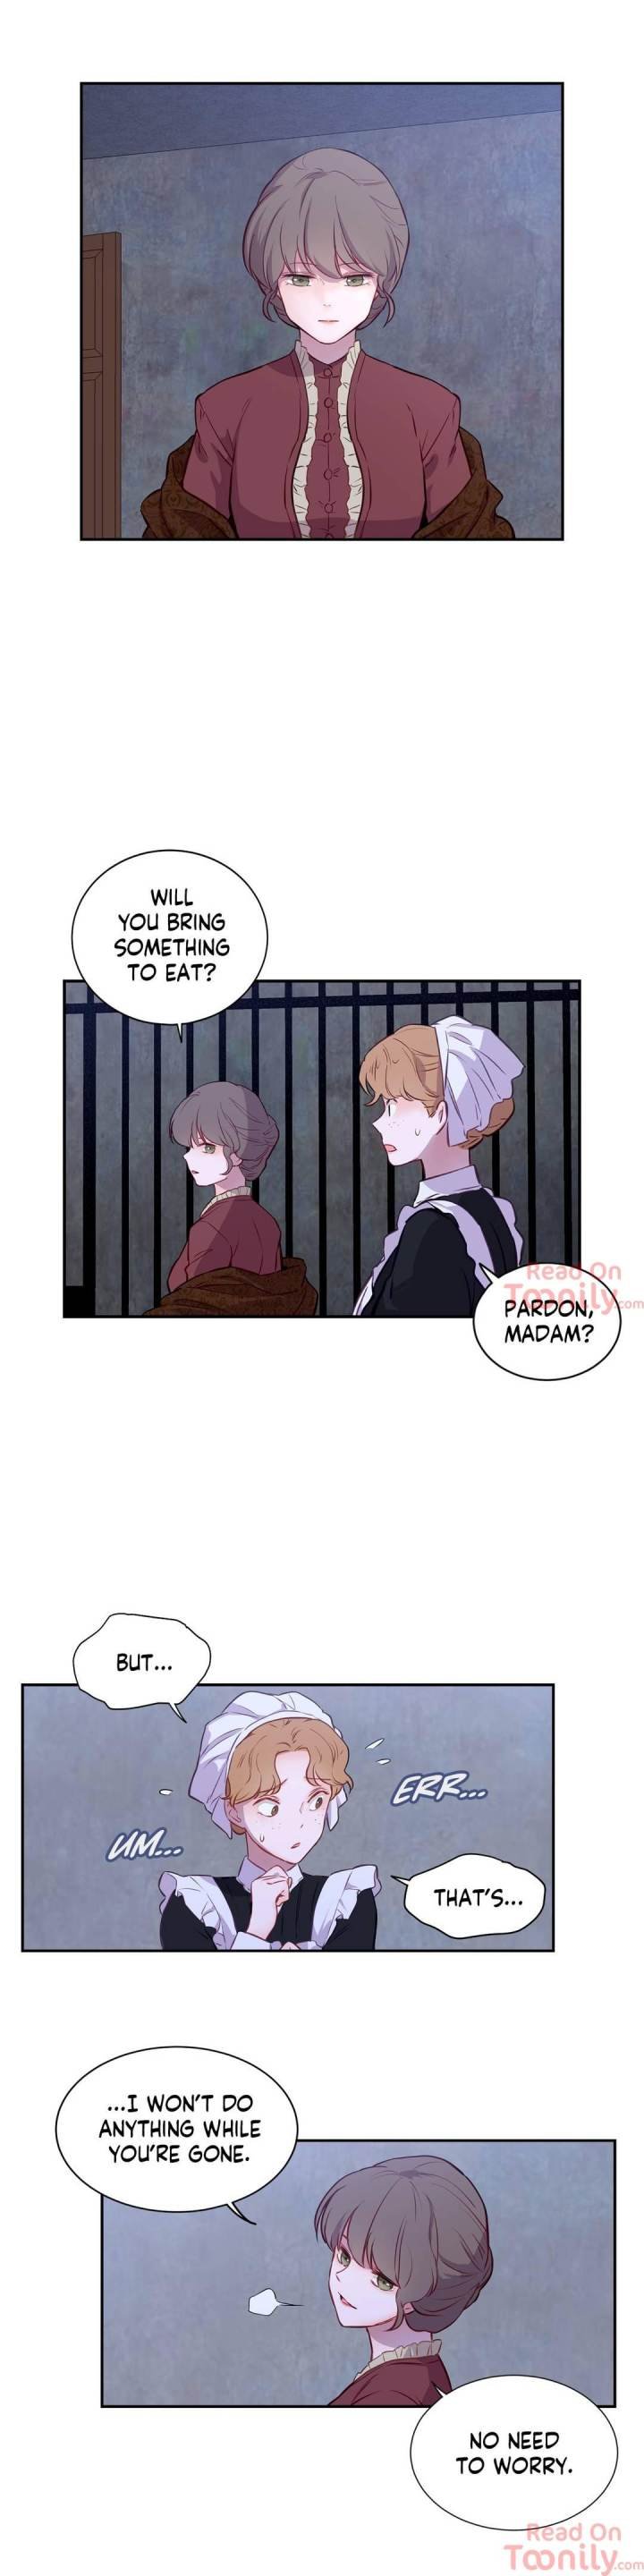 the-blood-of-madam-giselle-chap-3-9